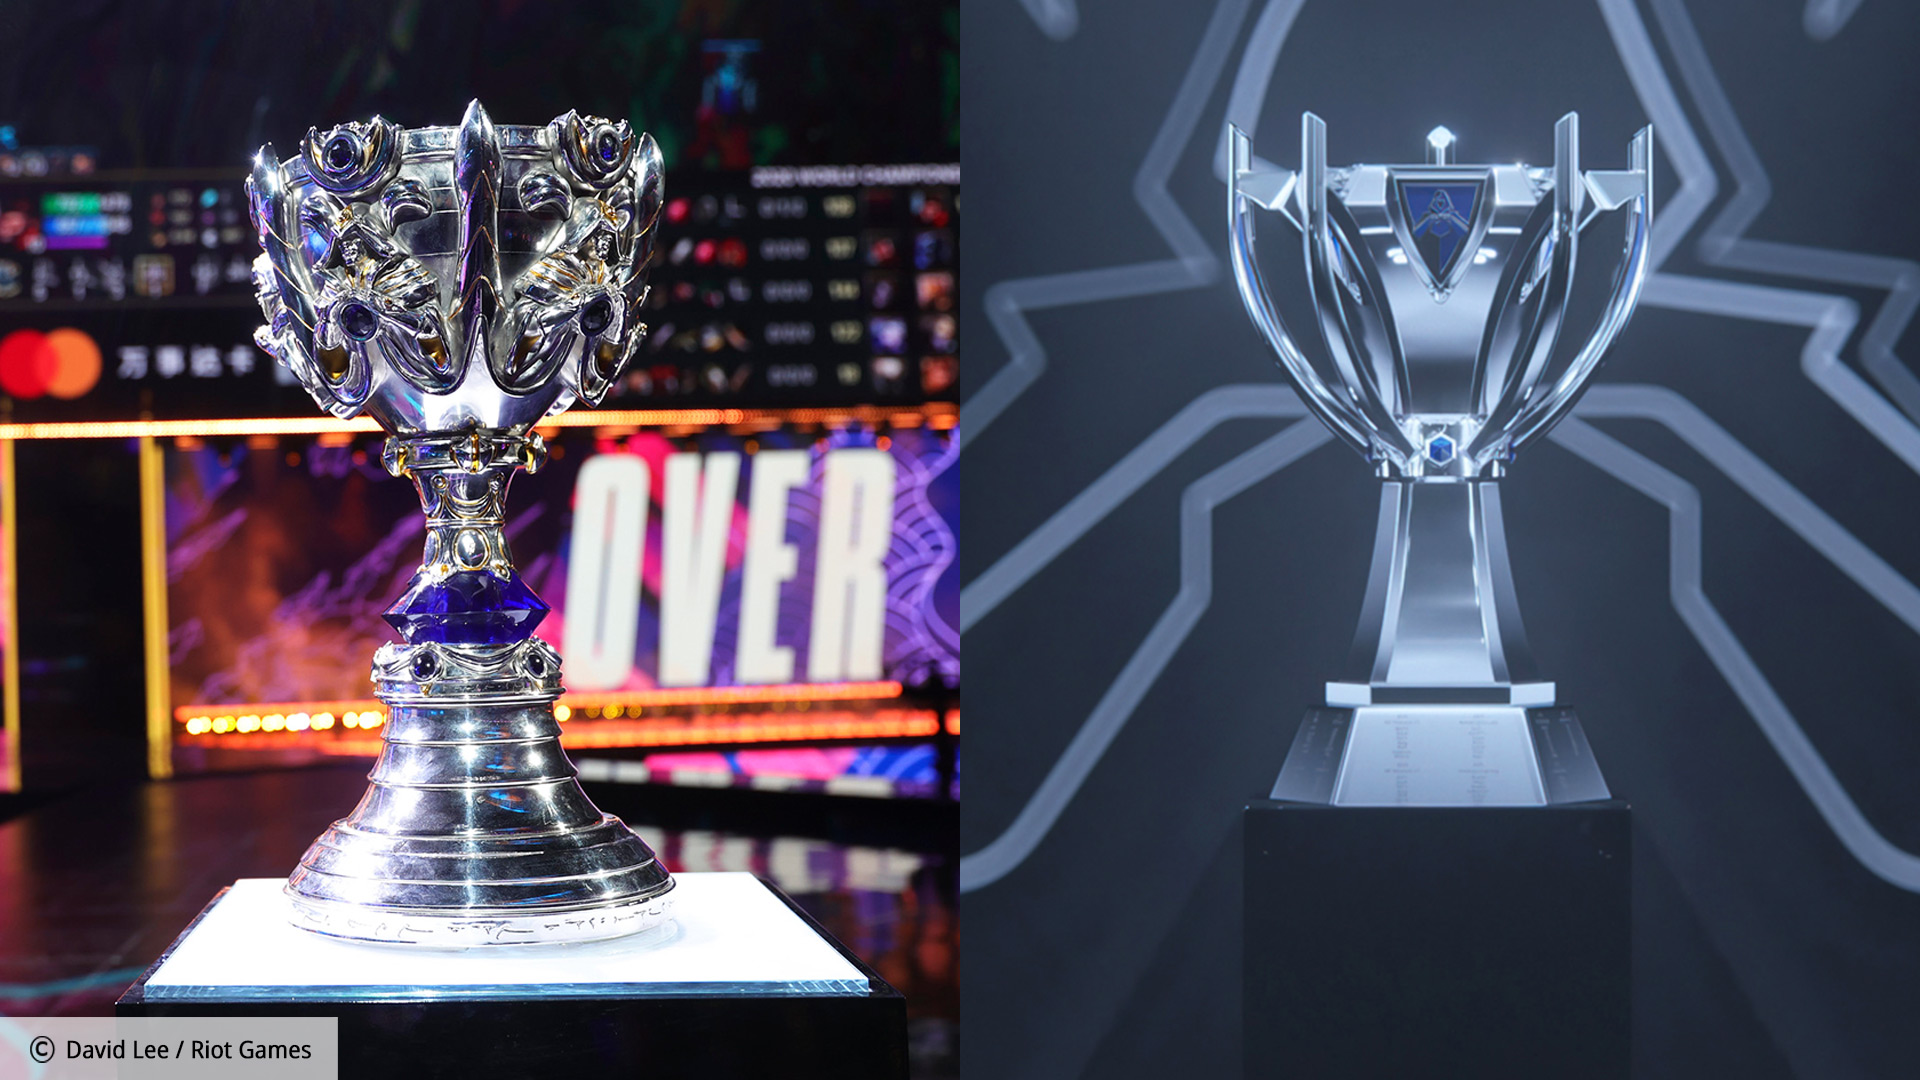 Sorry Riot, but the new League of Legends Summoner’s Cup ain’t it